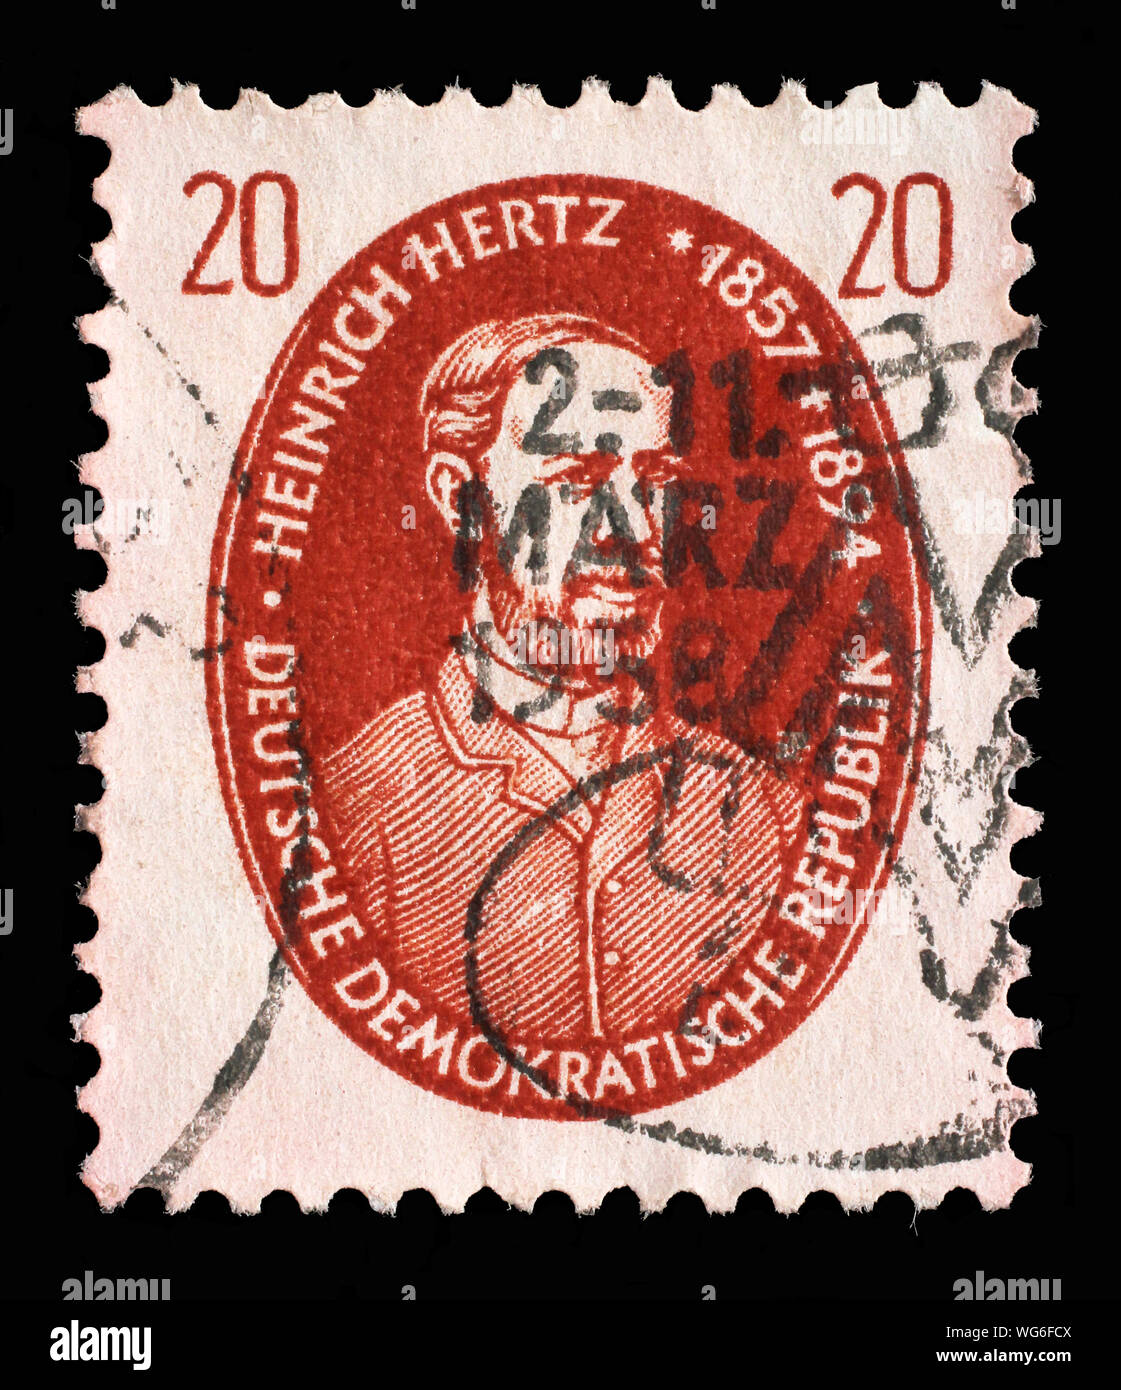 Stamp issued in Germany - Democratic Republic (DDR) shows Heinrich Rudolf Hertz, Famous People serie, circa 1957. Stock Photo